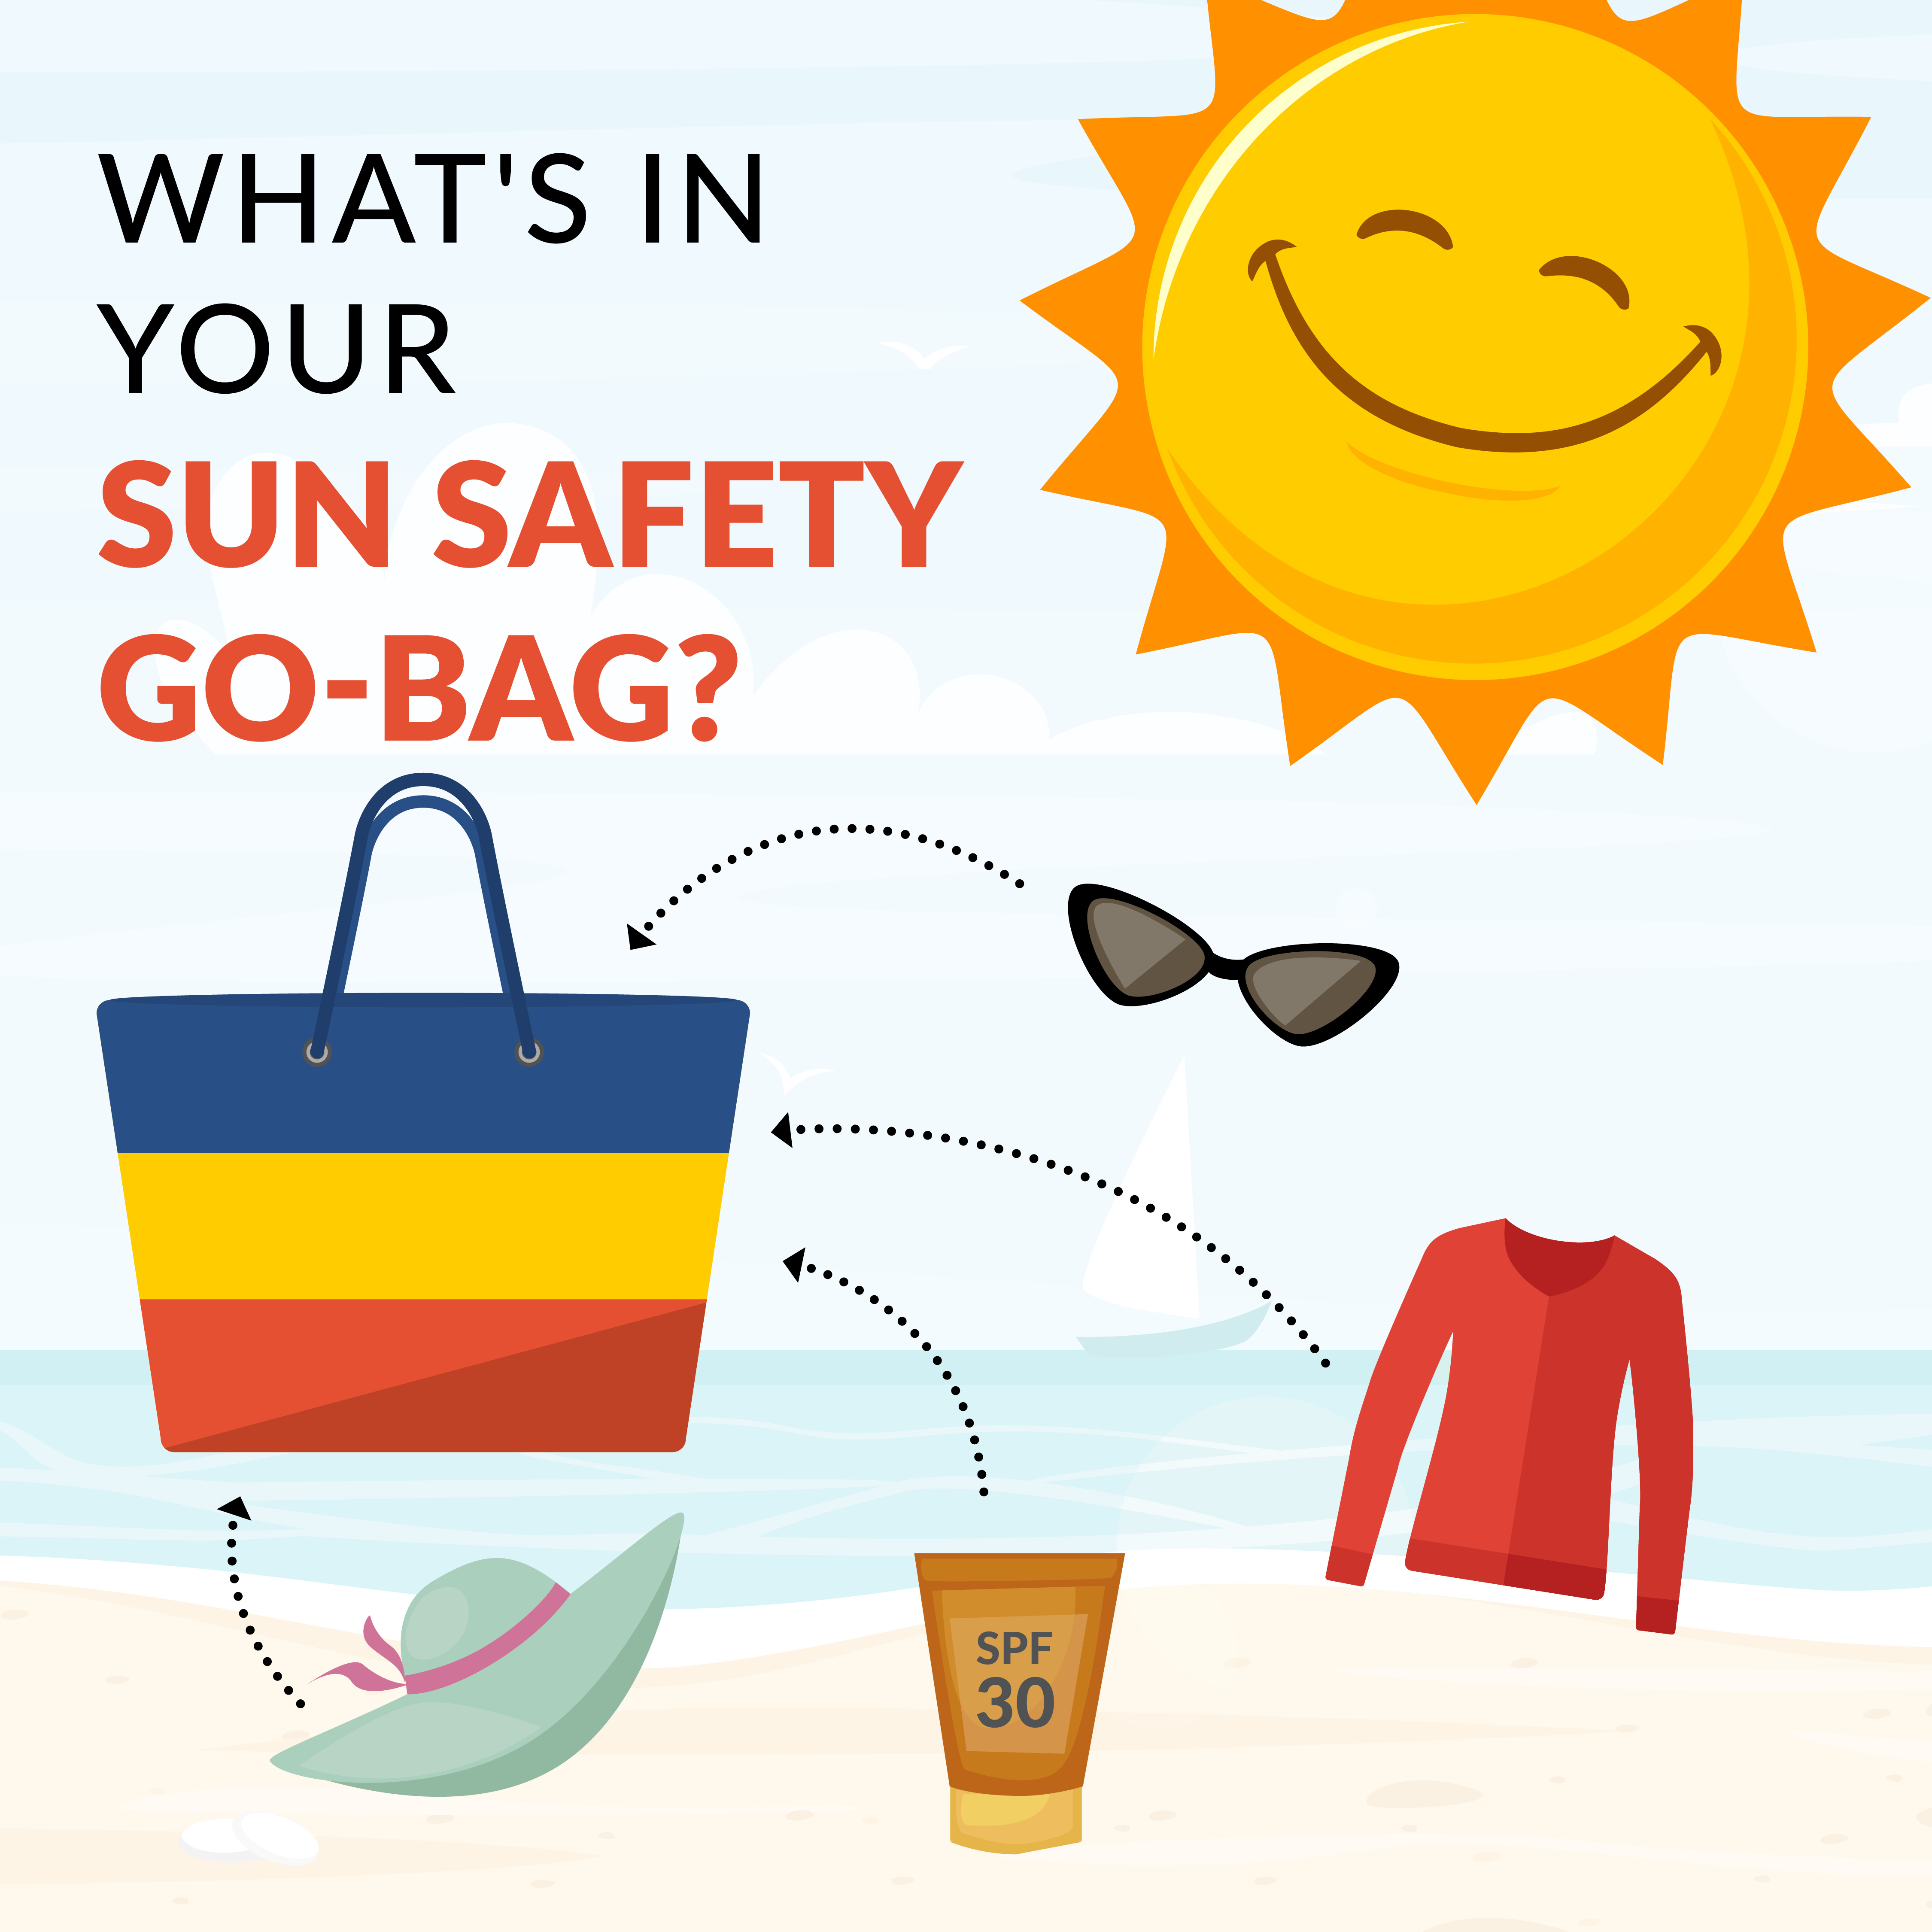 What's in your sun safety go-bag? Hat, SPF, bright red shirt, and sunglasses